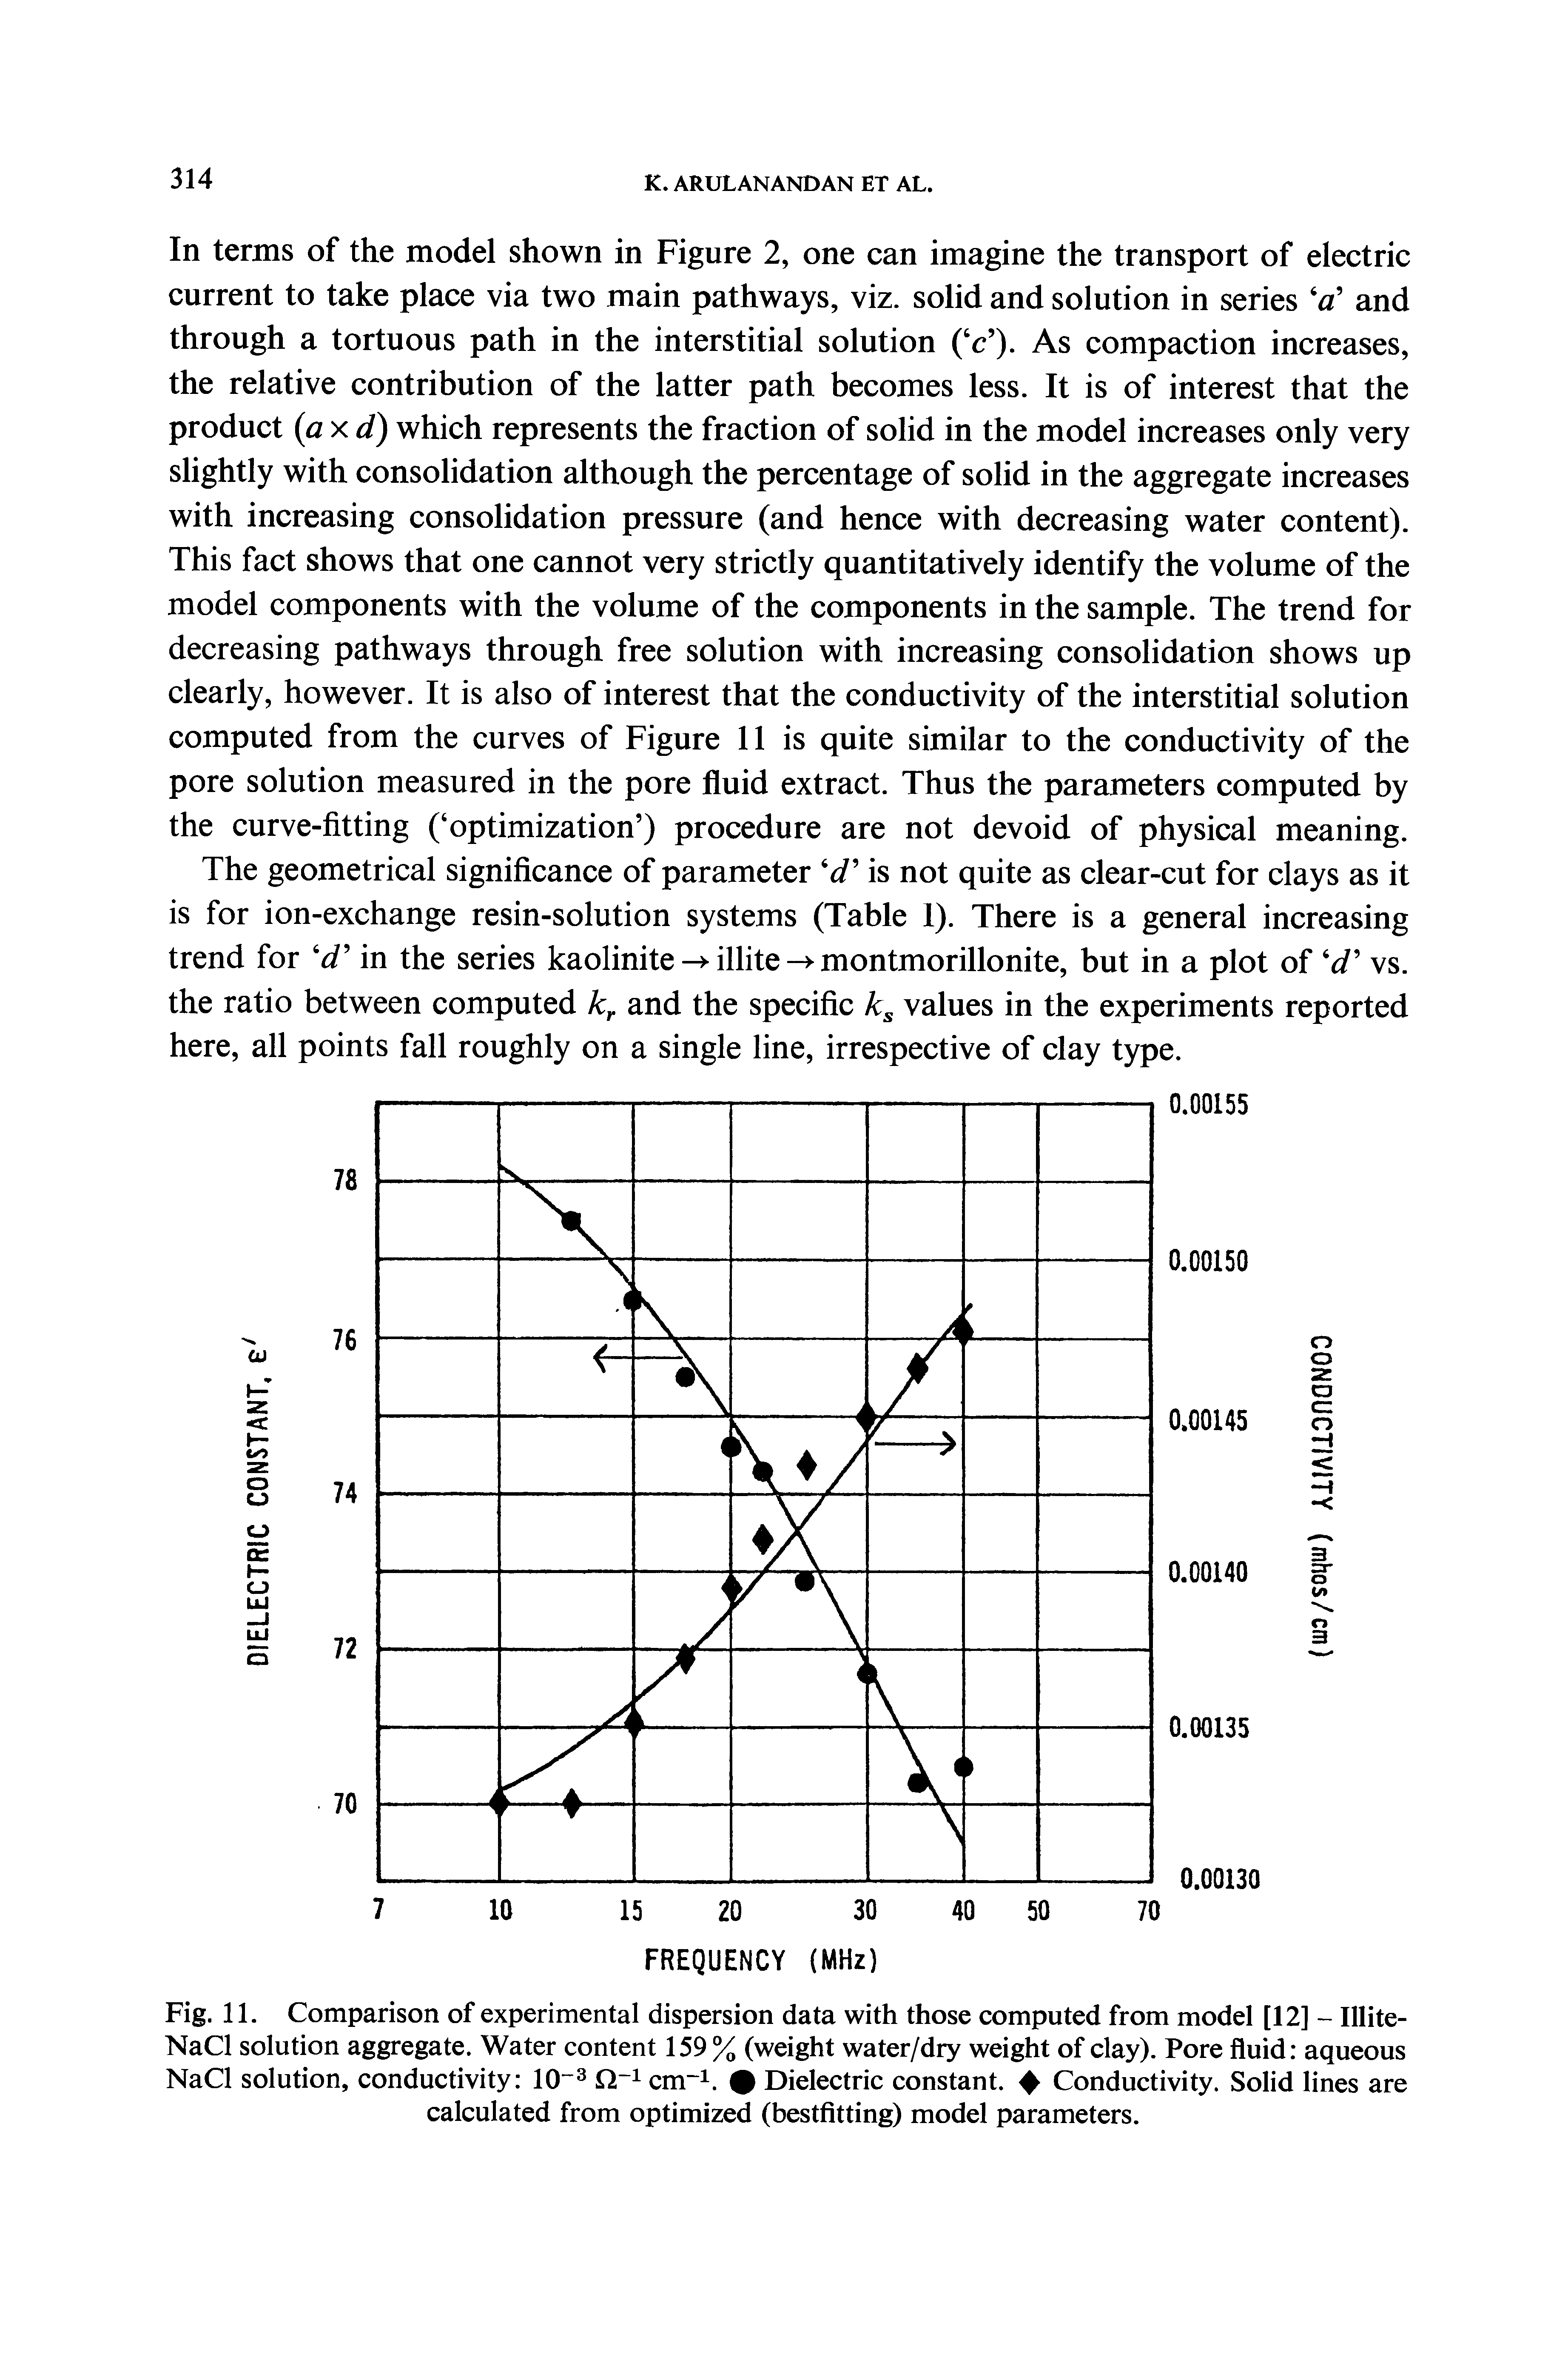 Fig. 11. Comparison of experimental dispersion data with those computed from model [12] - Illite-NaCl solution aggregate. Water content 159 % (weight water/dry weight of clay). Pore fluid aqueous NaCl solution, conductivity 10 crrr. Dielectric constant. Conductivity. Solid lines are calculated from optimized (bestfitting) model parameters.